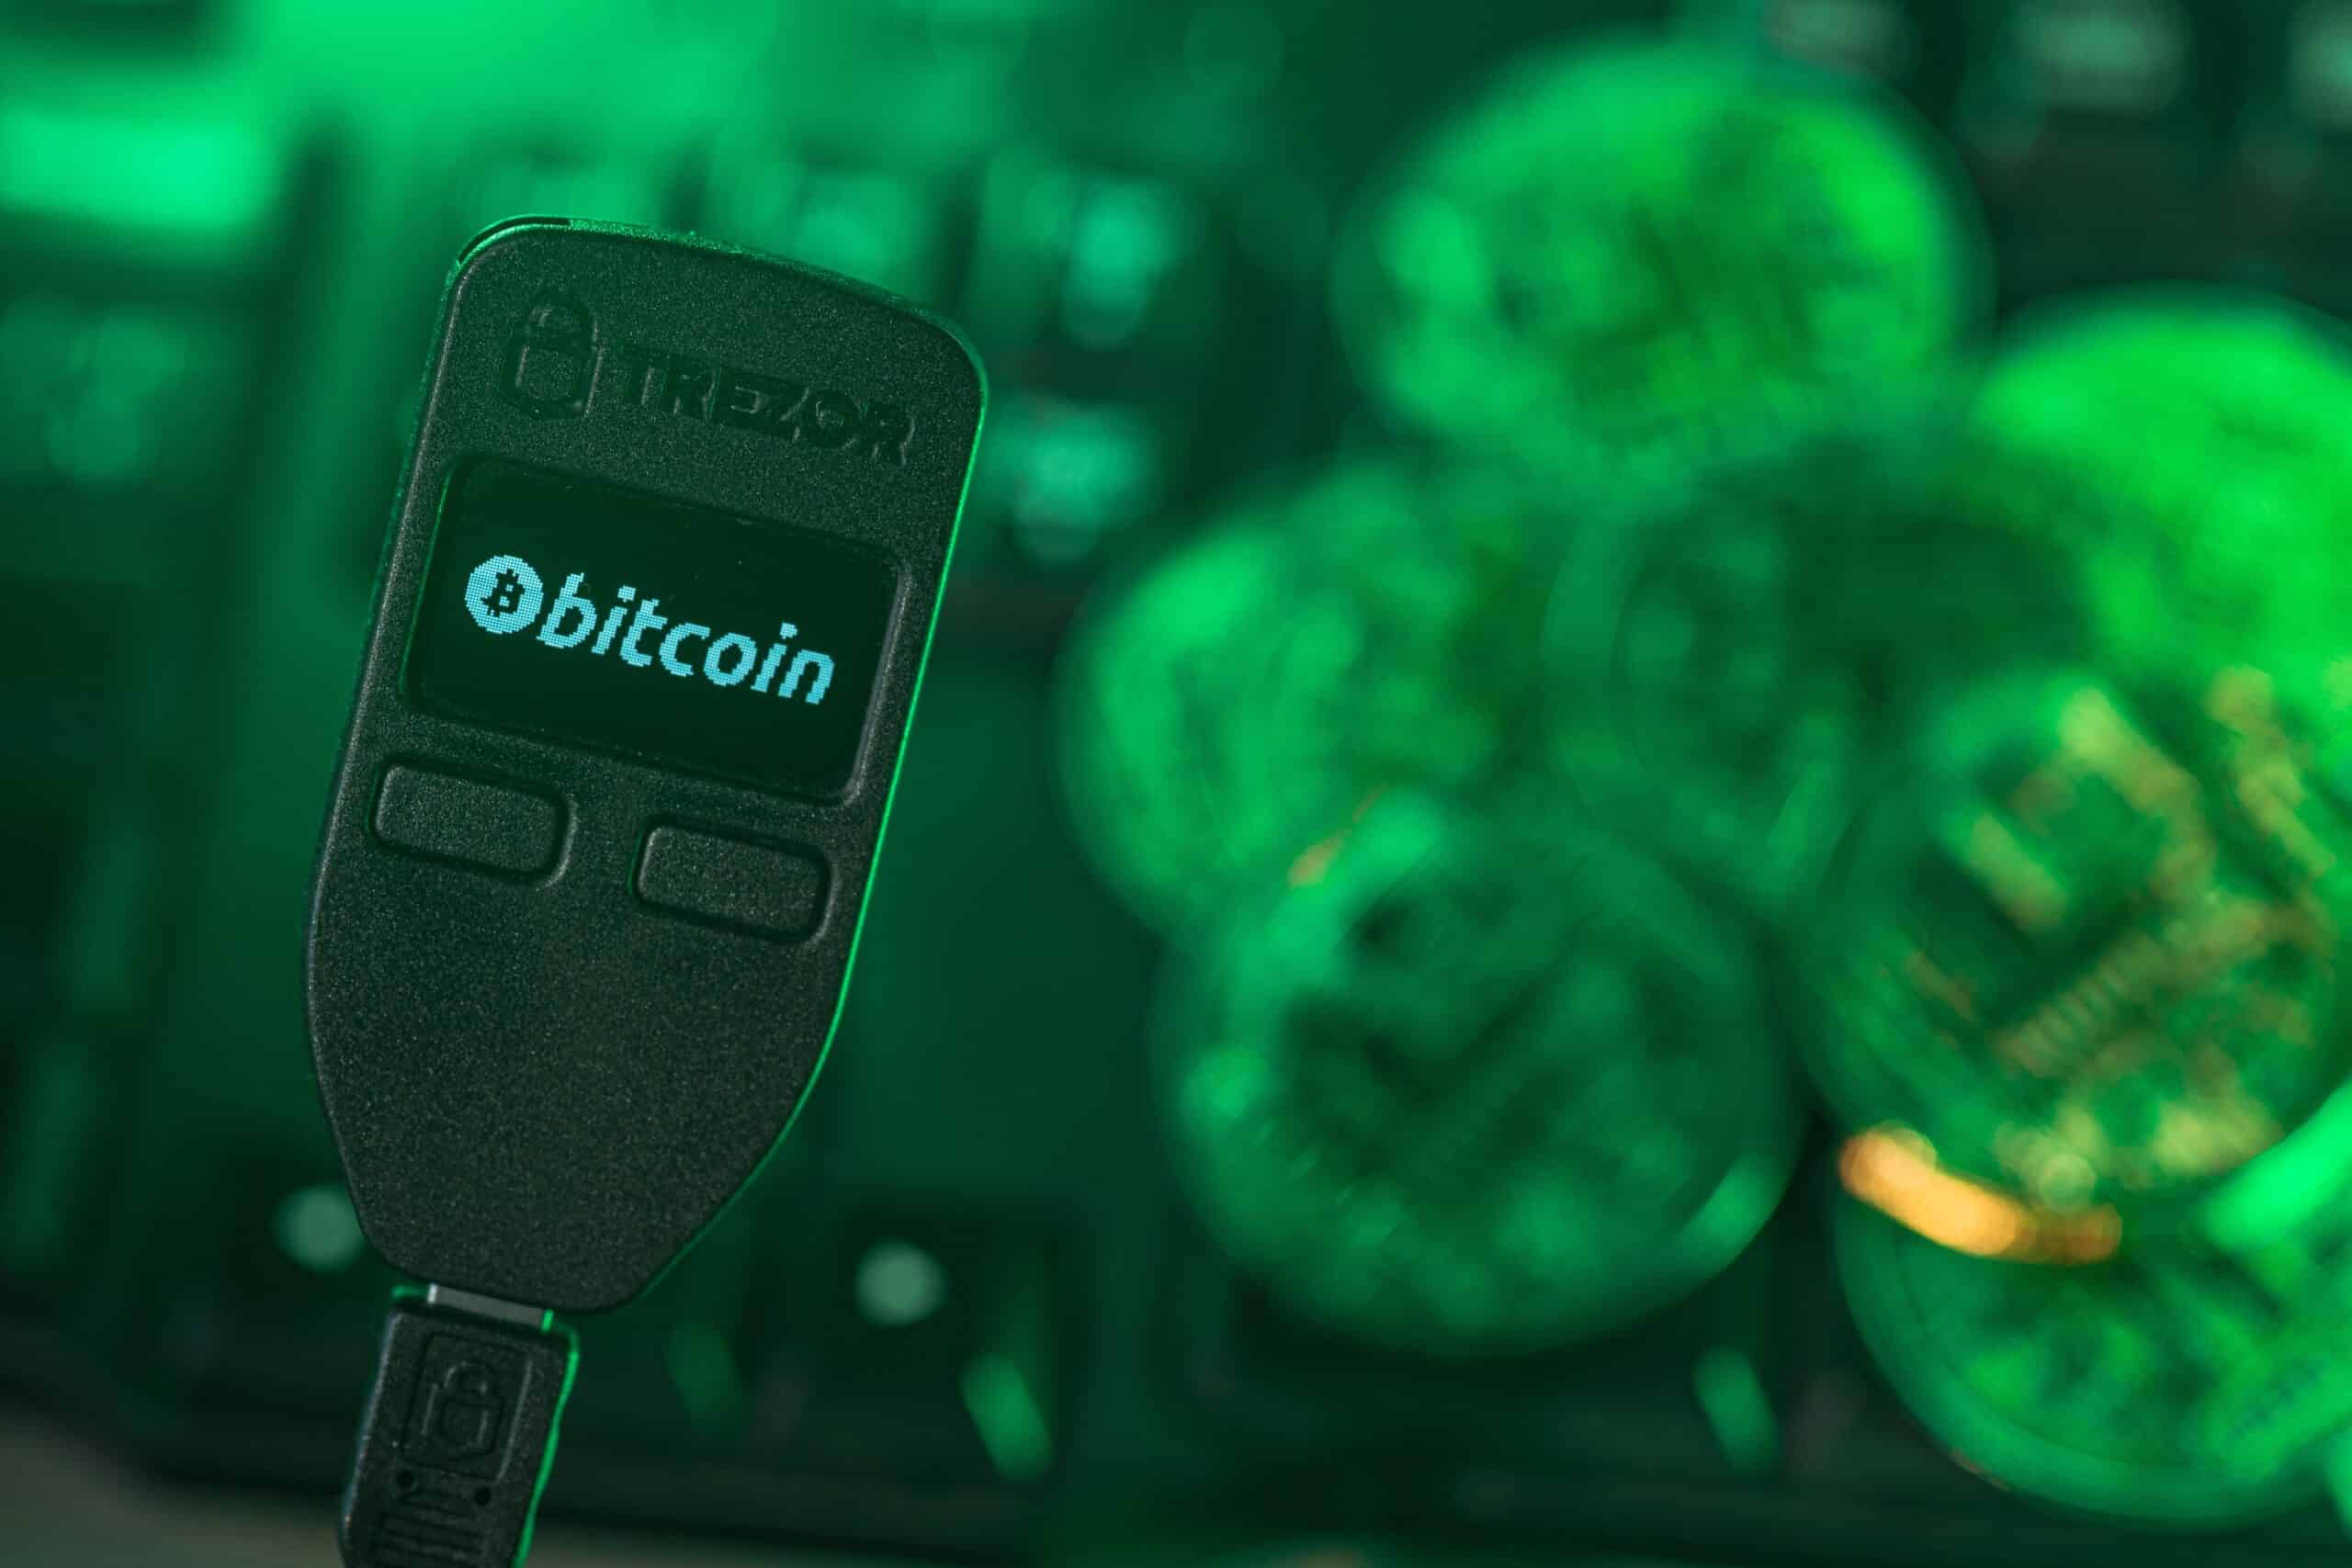 Hardware Wallet Firm Trezor Says 66,000 Users Impacted by